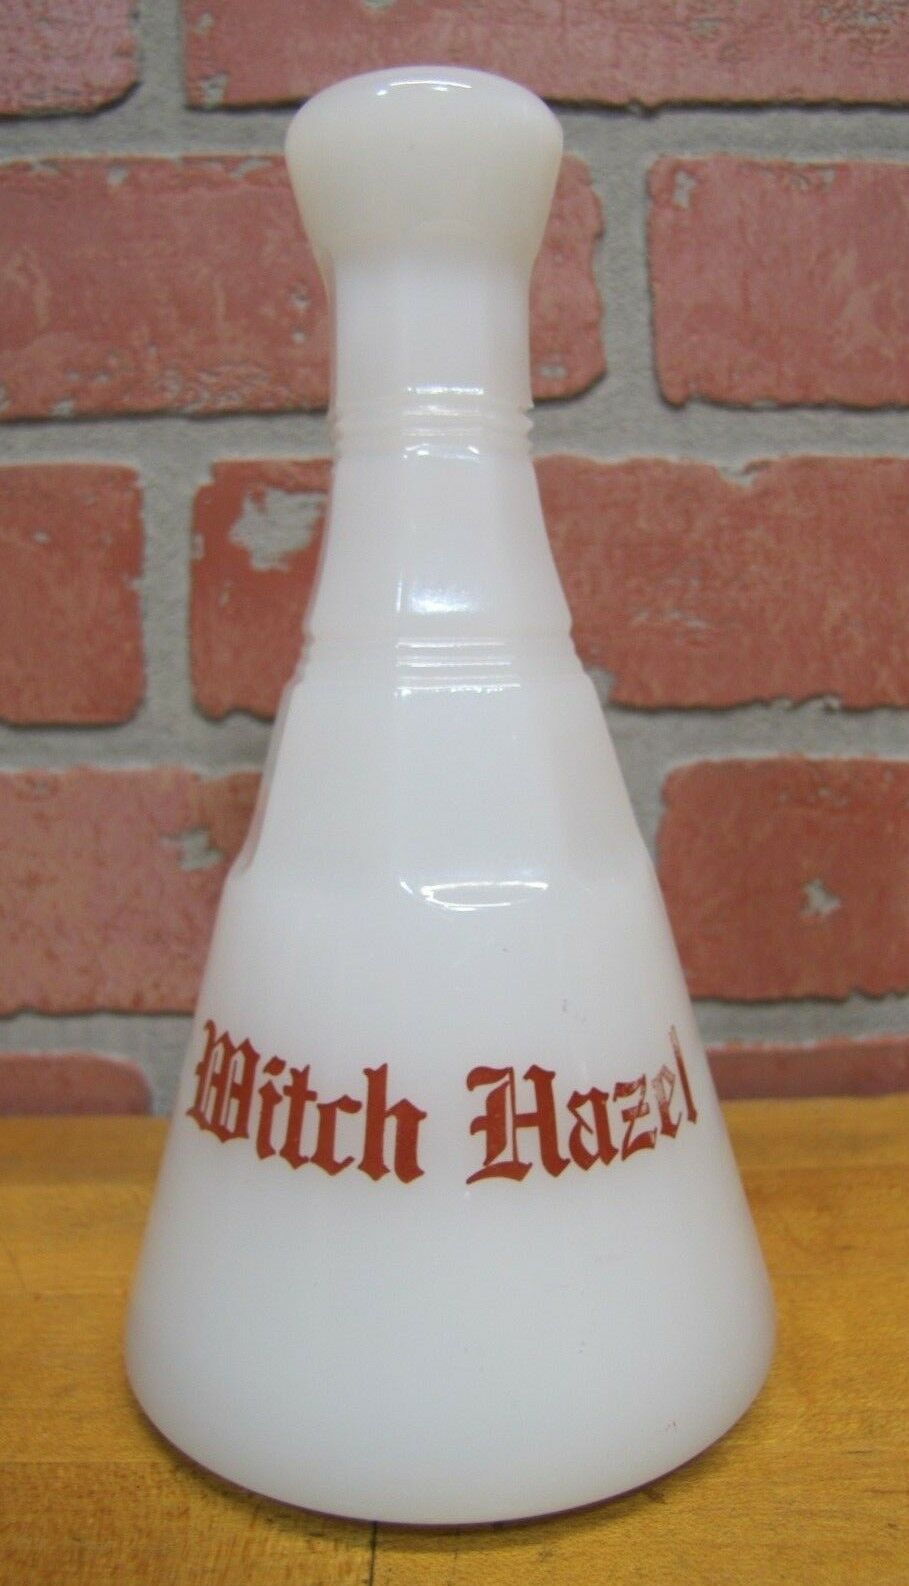 WITCH HAZEL Antique Clambroth White Milk Glass Apothecary Barber Medicine Bottle